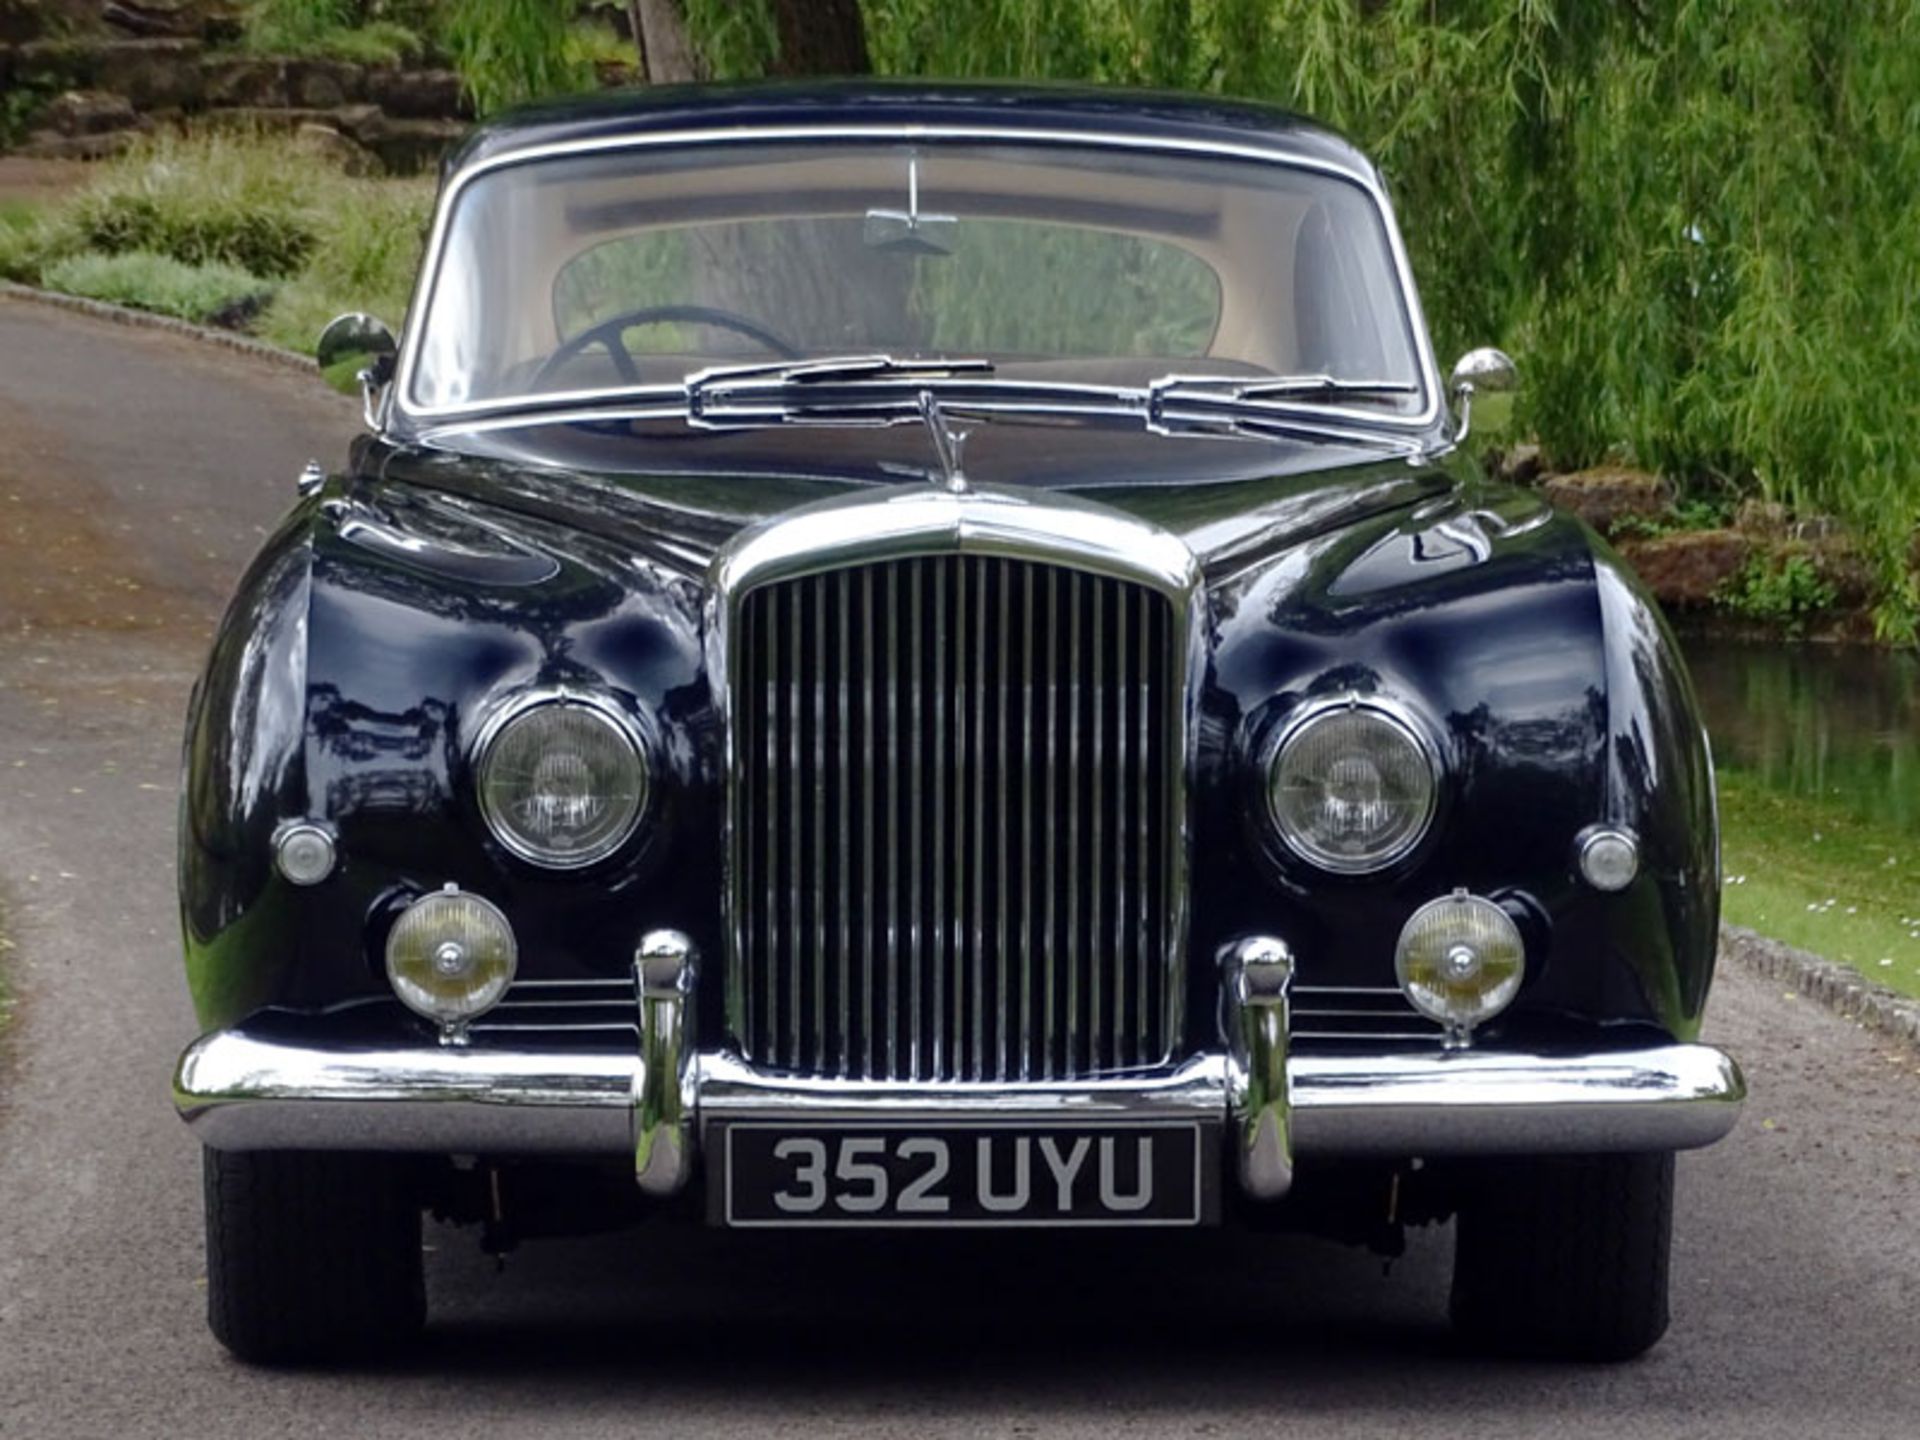 1956 Bentley S1 Continental Fastback - Image 2 of 15